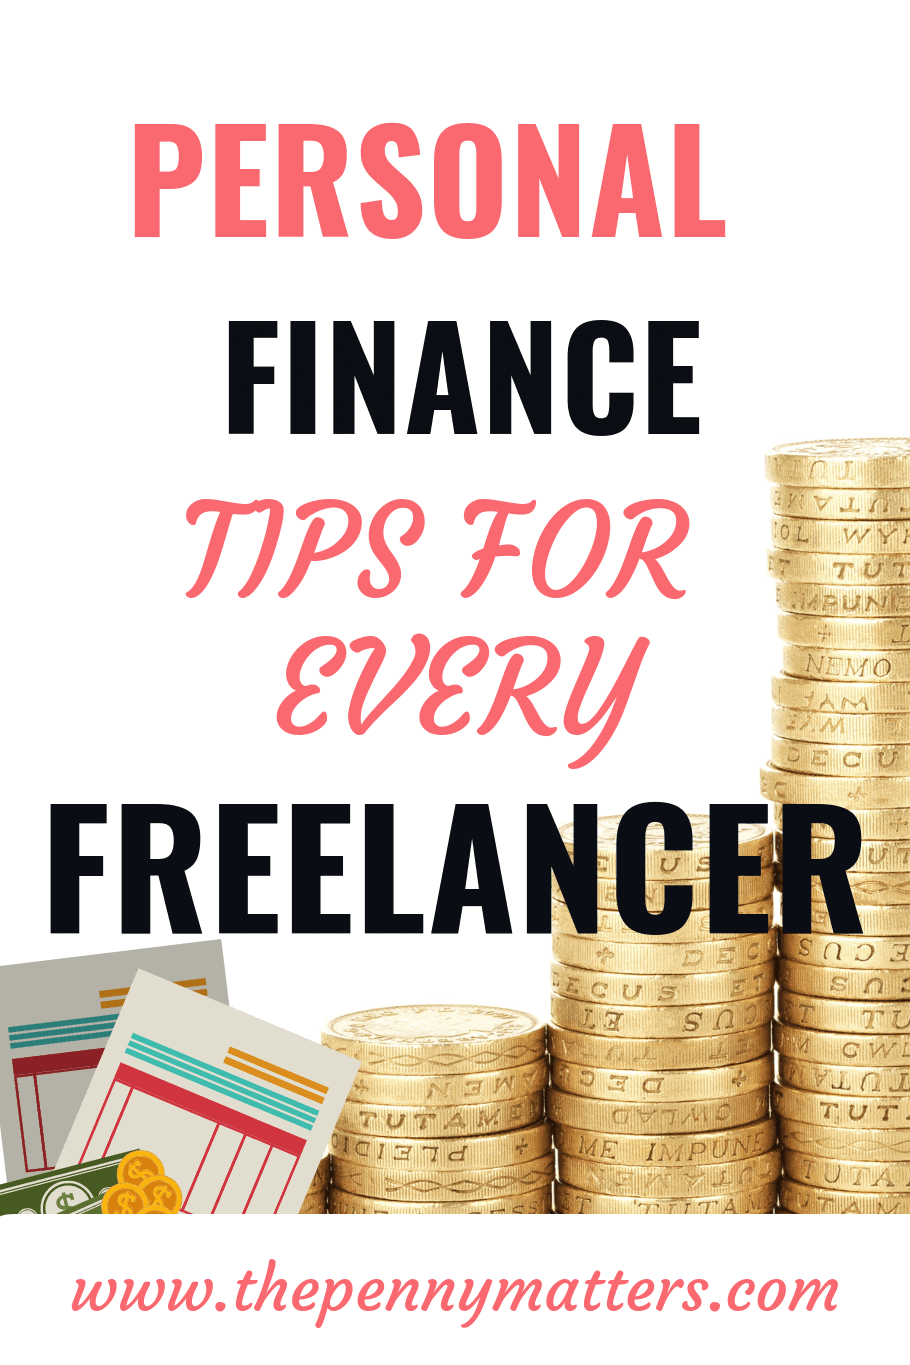 Personal Finance Tips for Every Freelancer